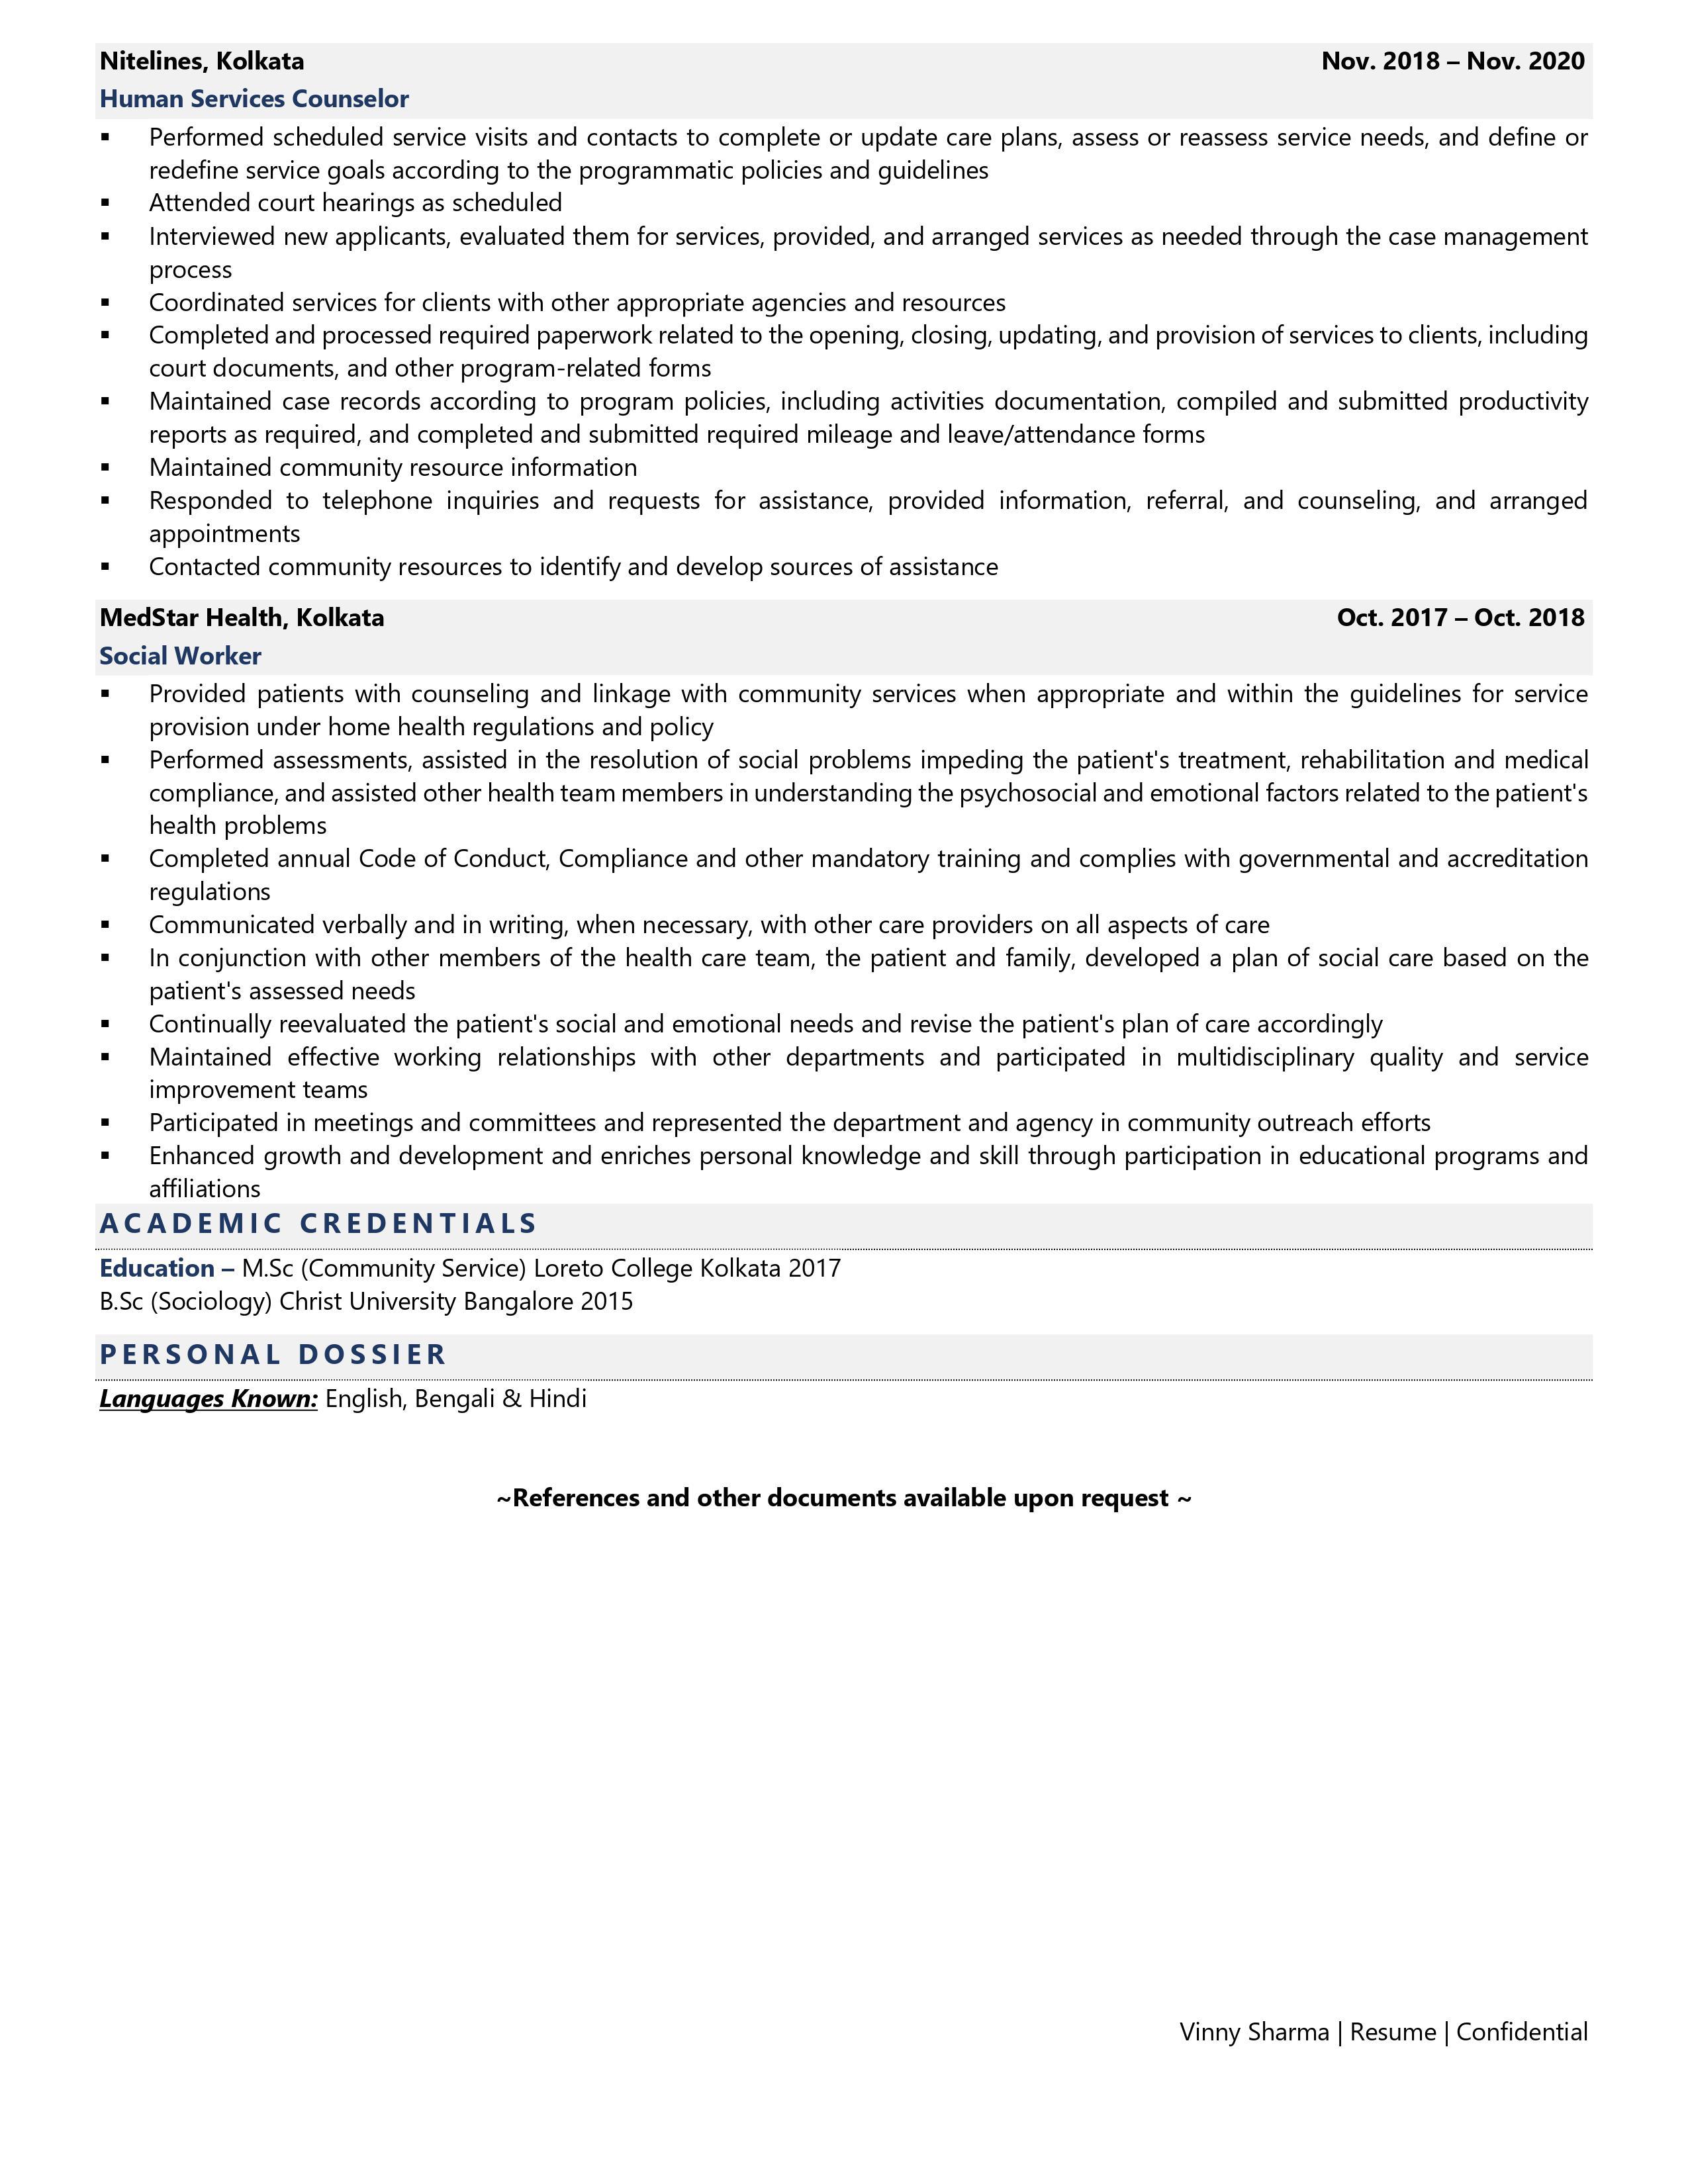 Social and Human Service Assistant - Resume Example & Template